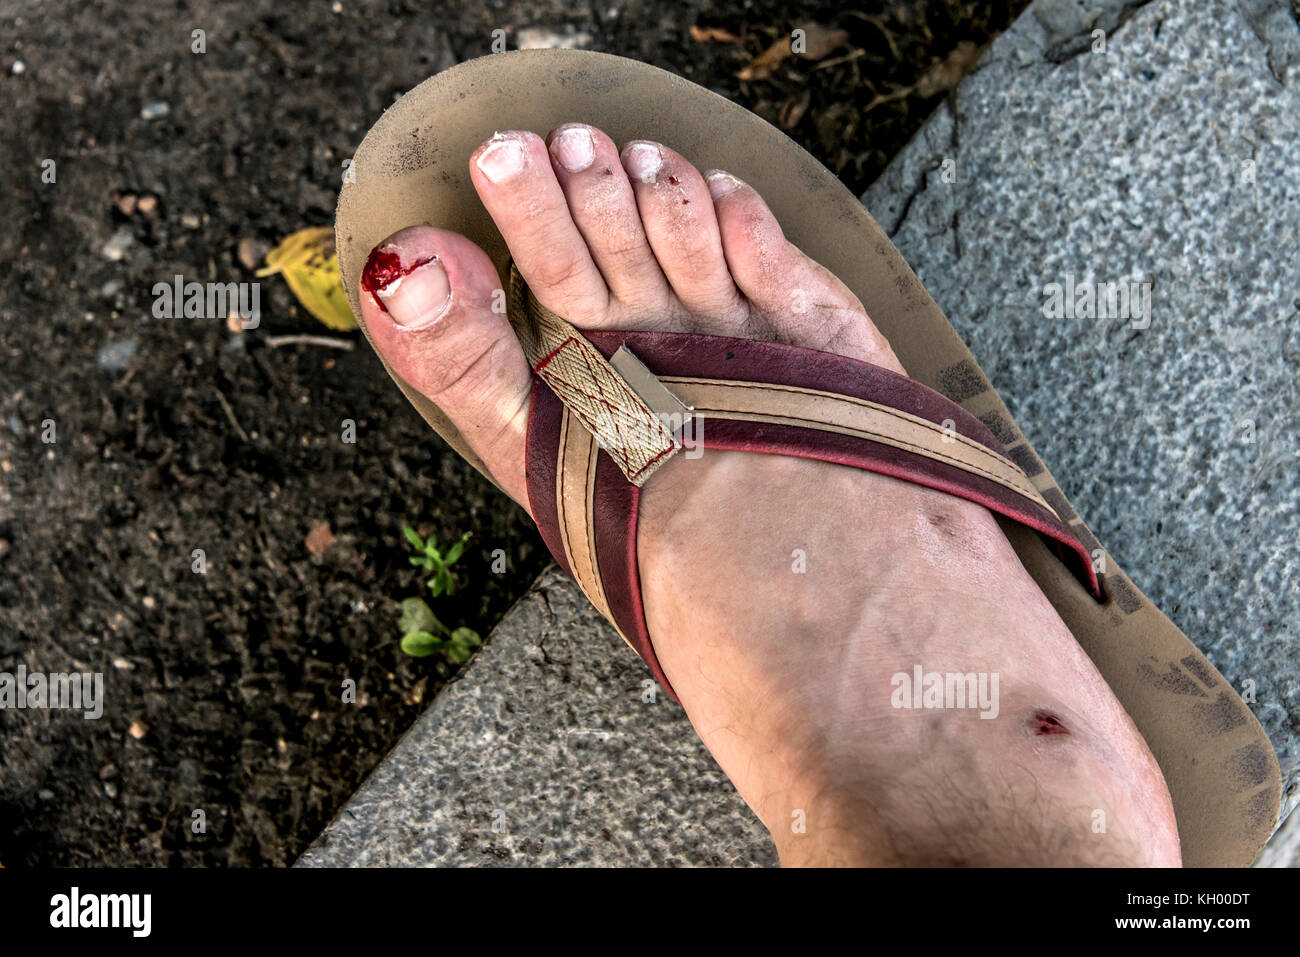 Accident flip flop cut foot nail toe have a bloody and bleeding wound from  injury after slipping Stock Photo - Alamy